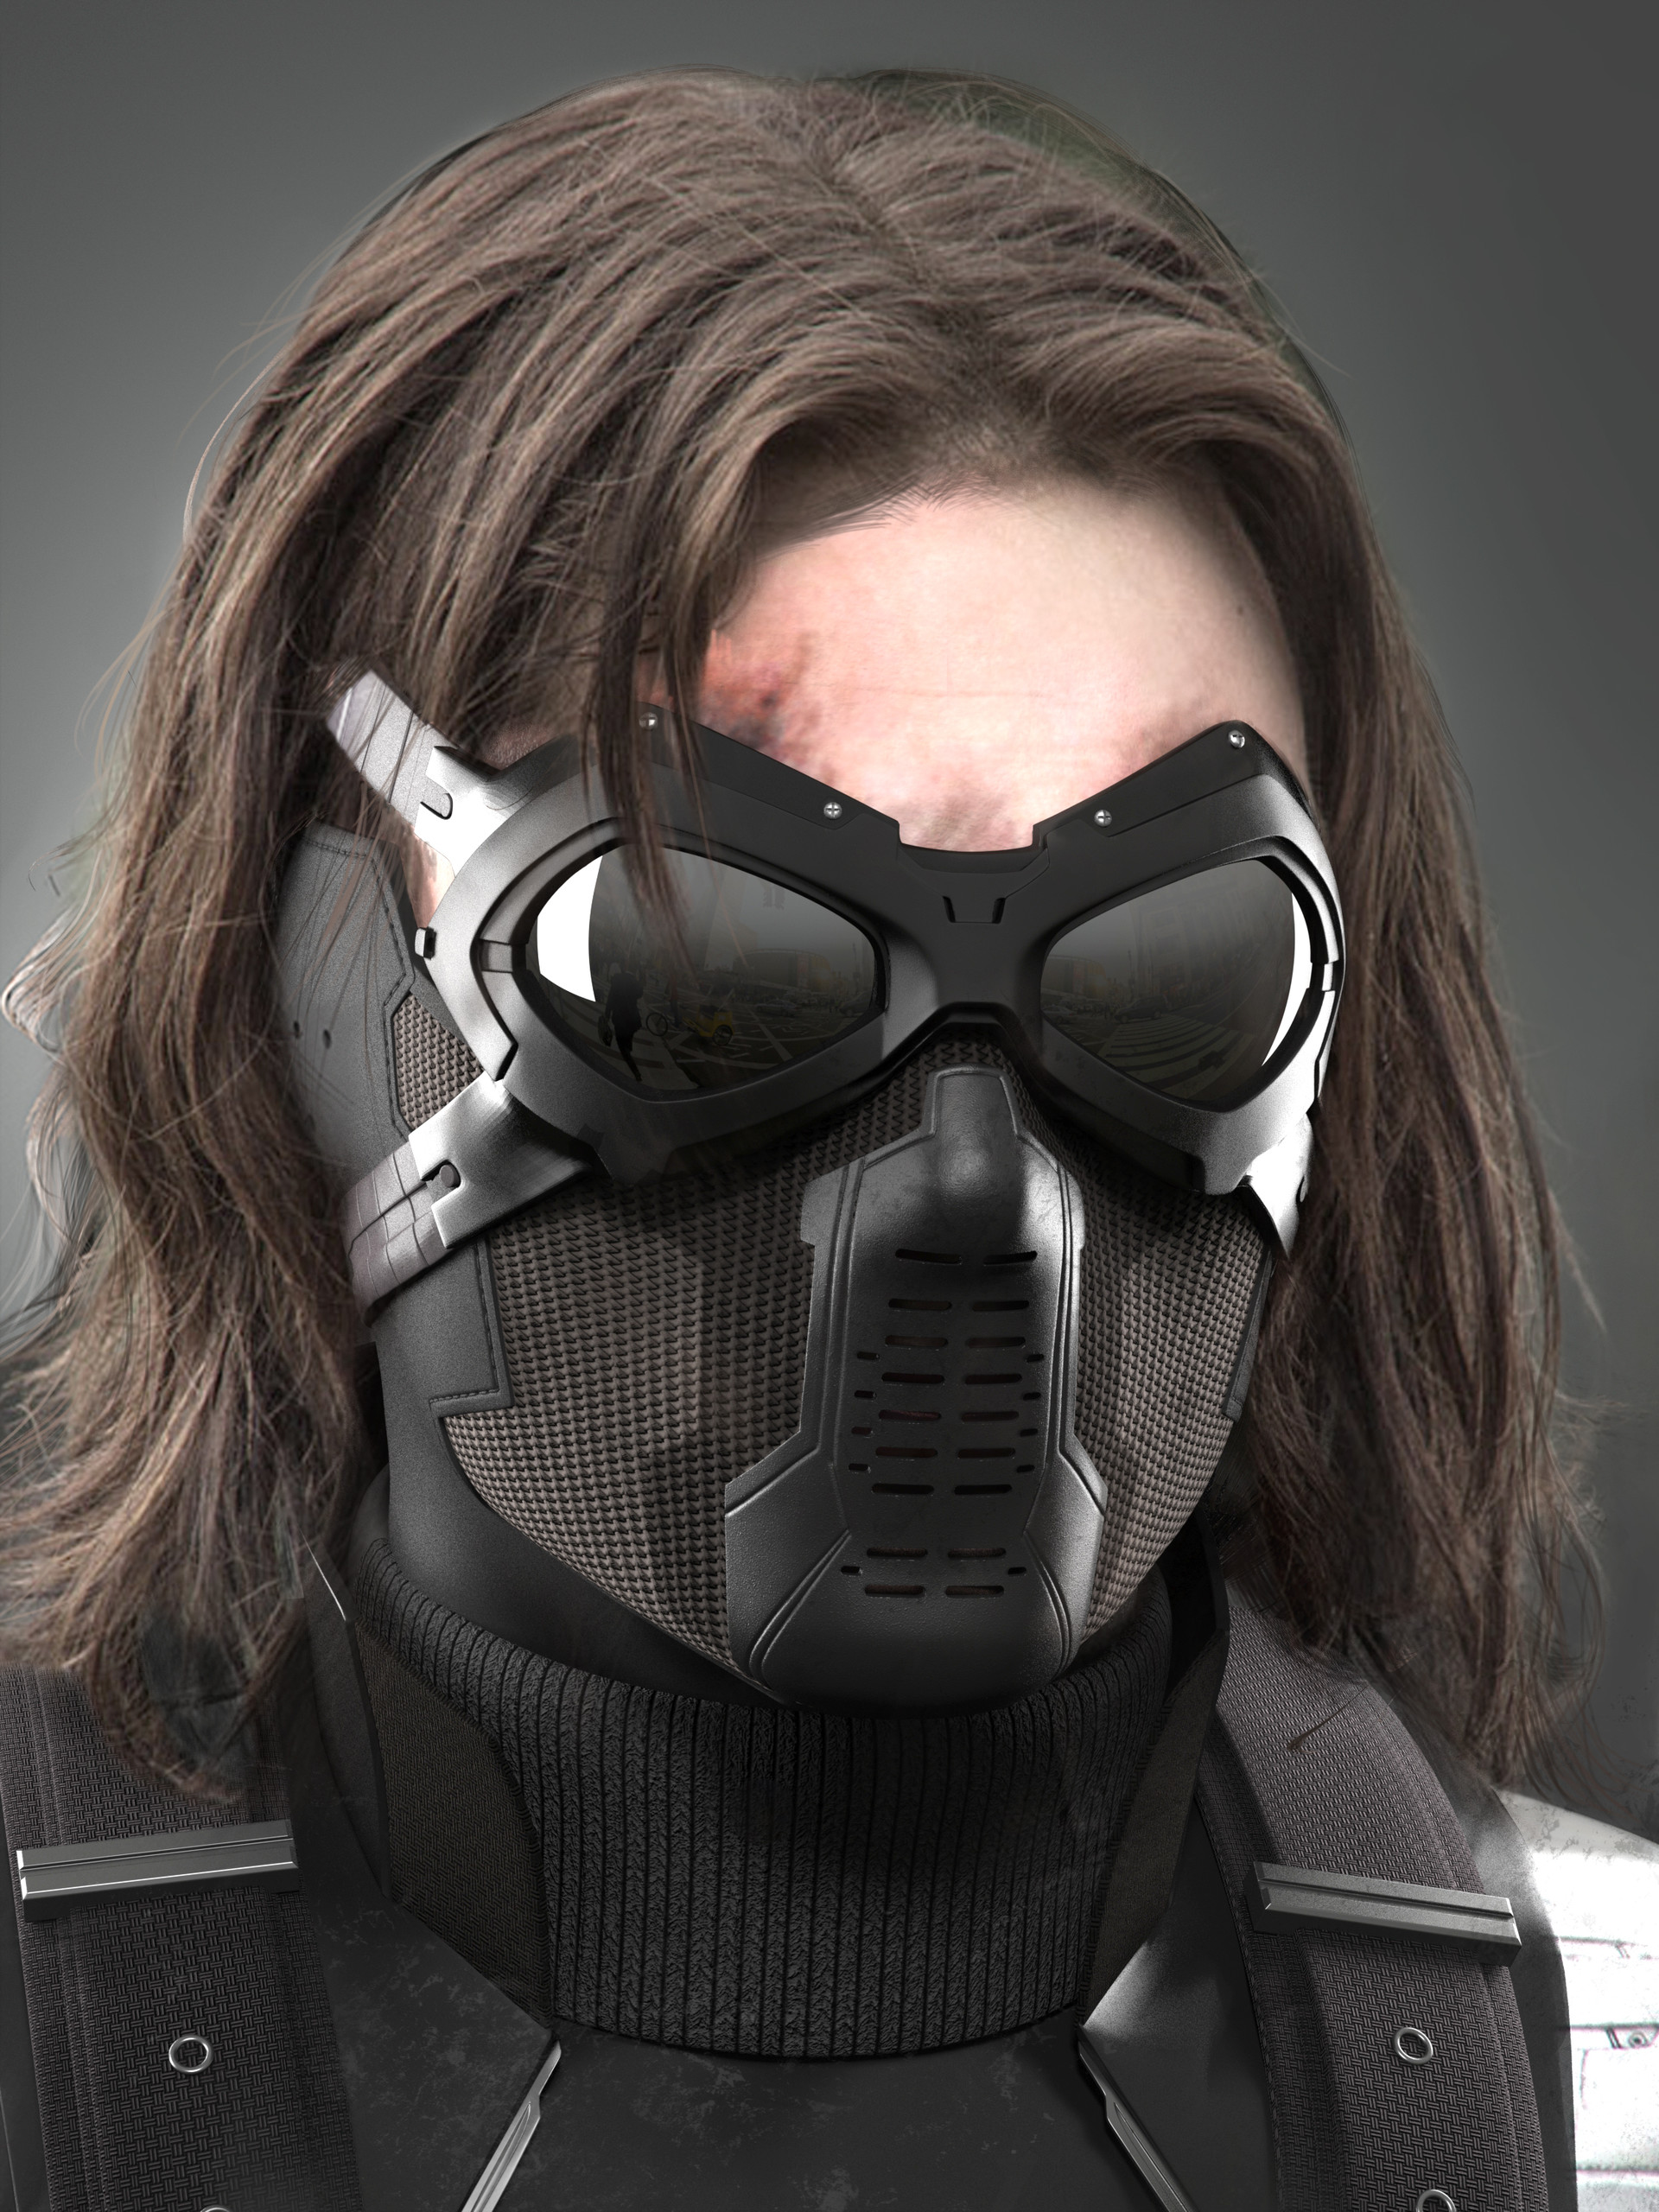 This is the model I created for the mask and goggles made for "Captain...